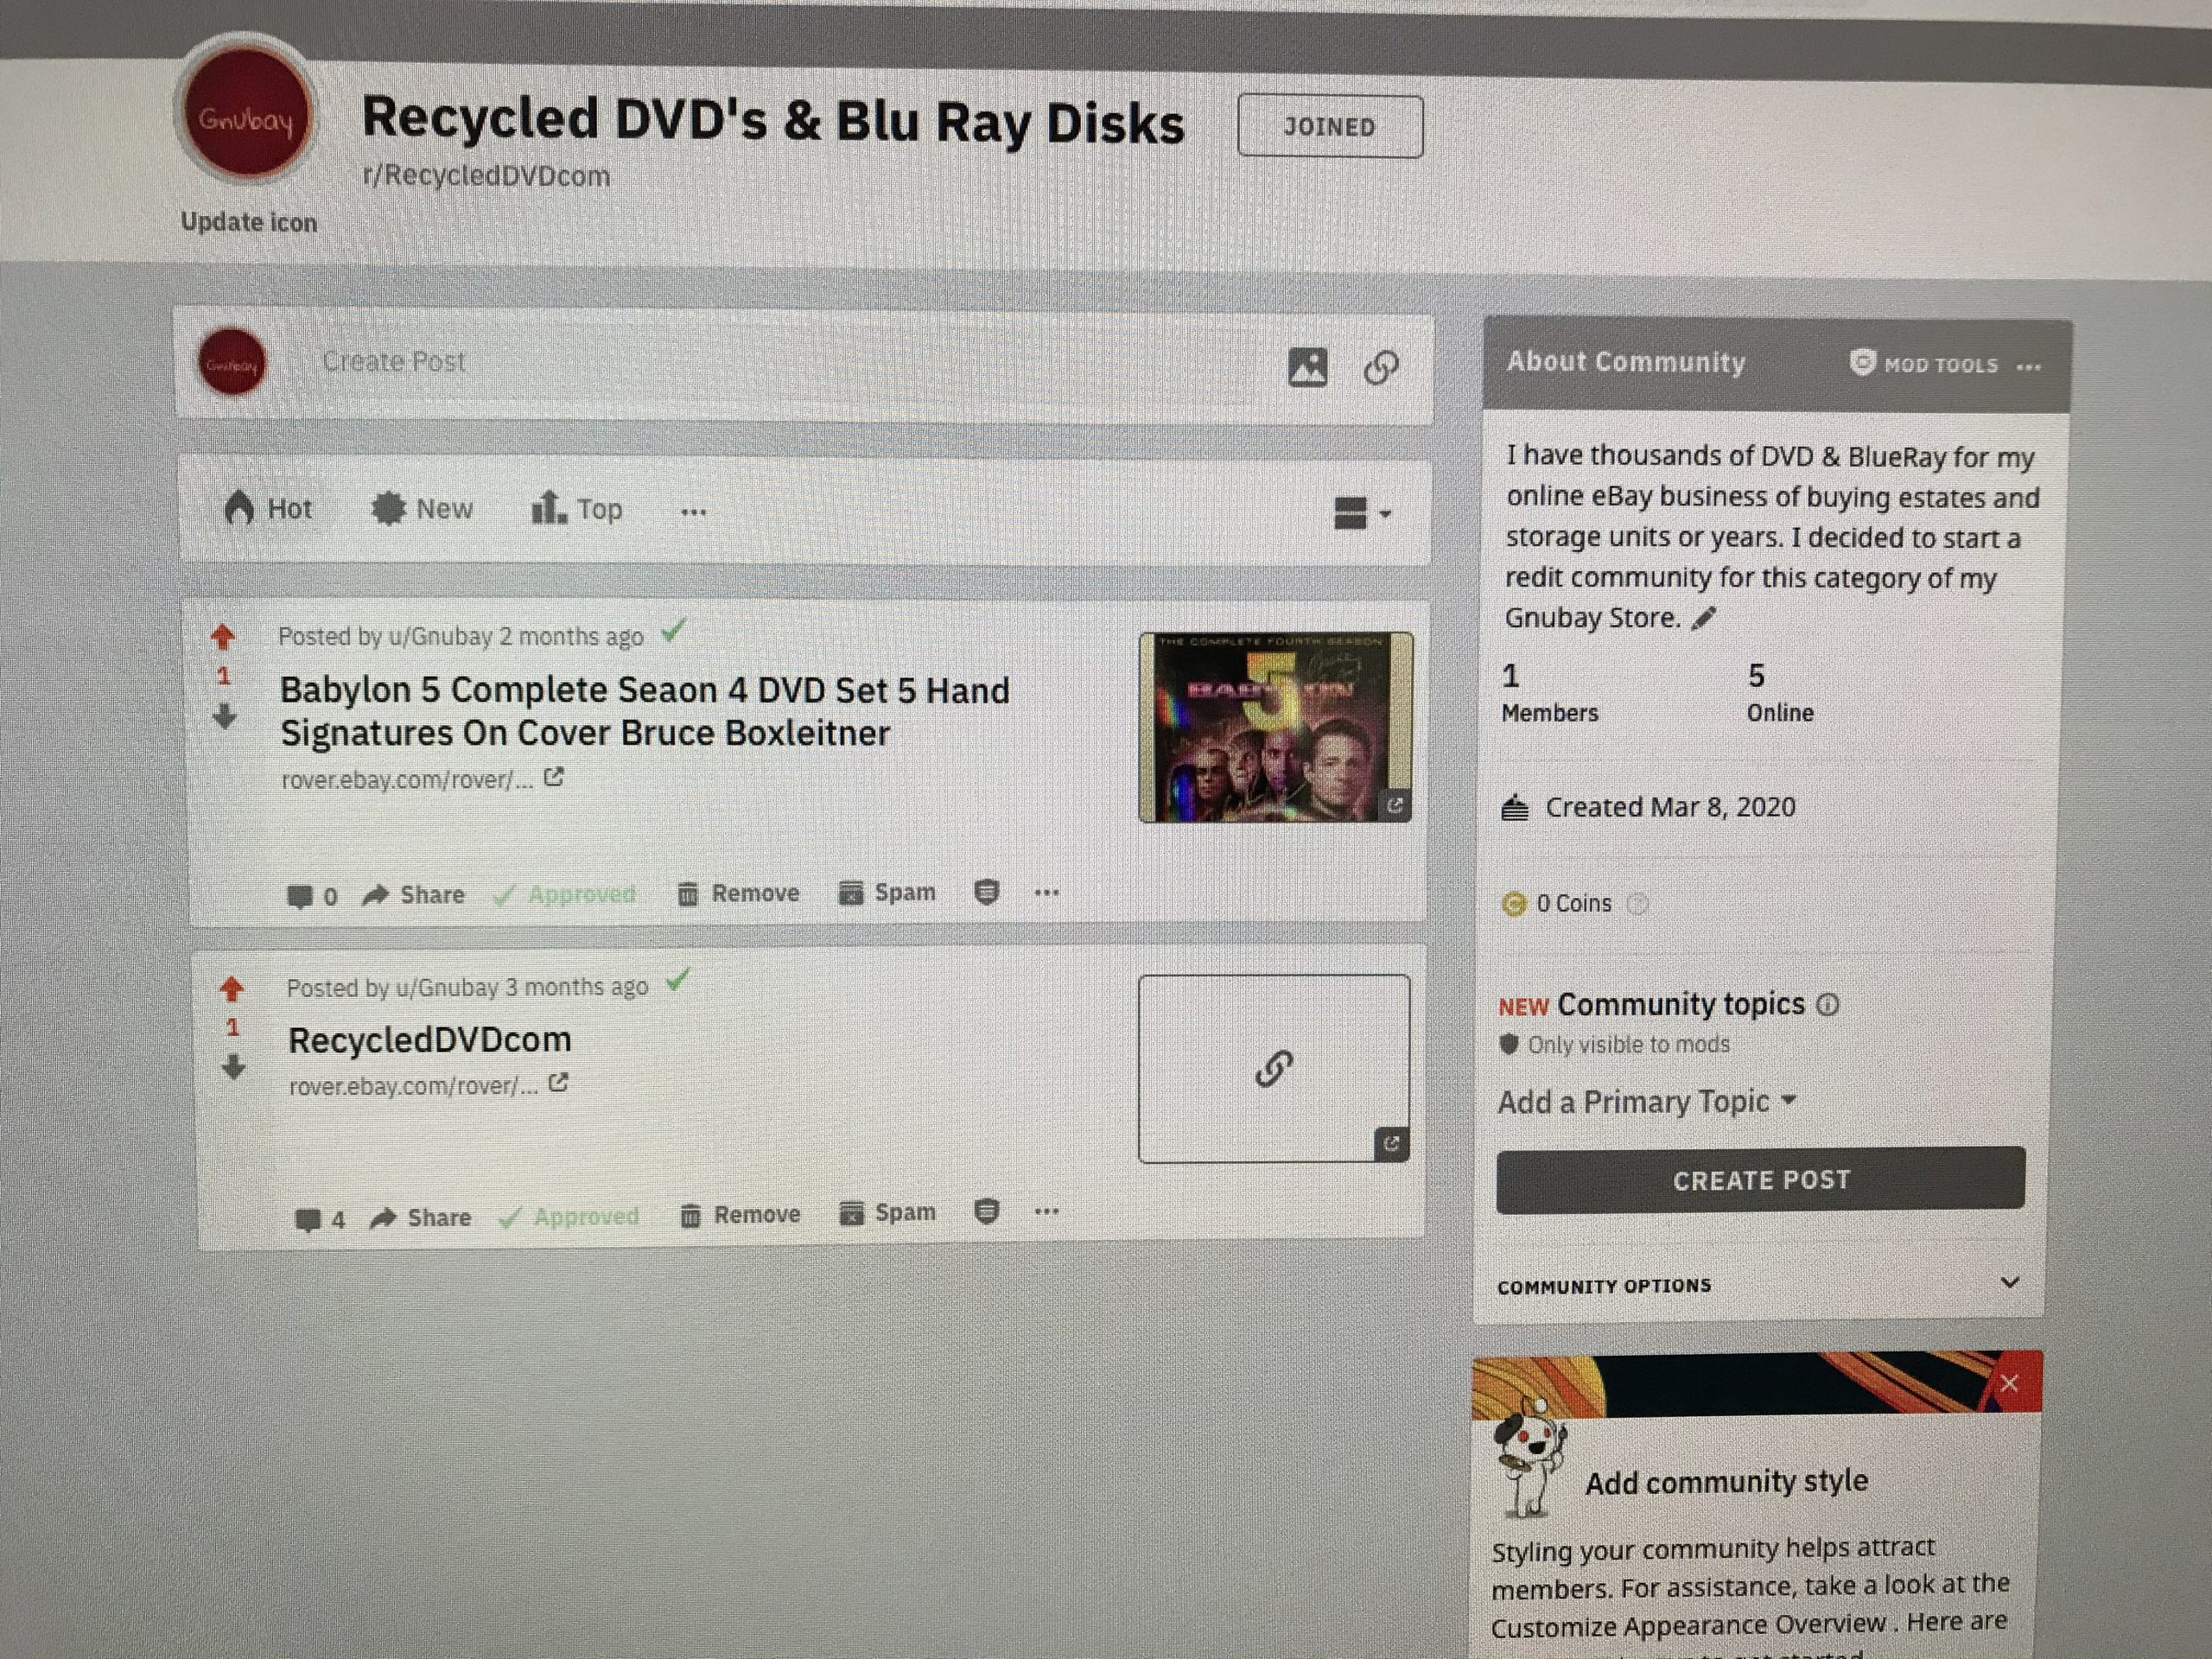 Recycled DVD's & Blue Ray Disks